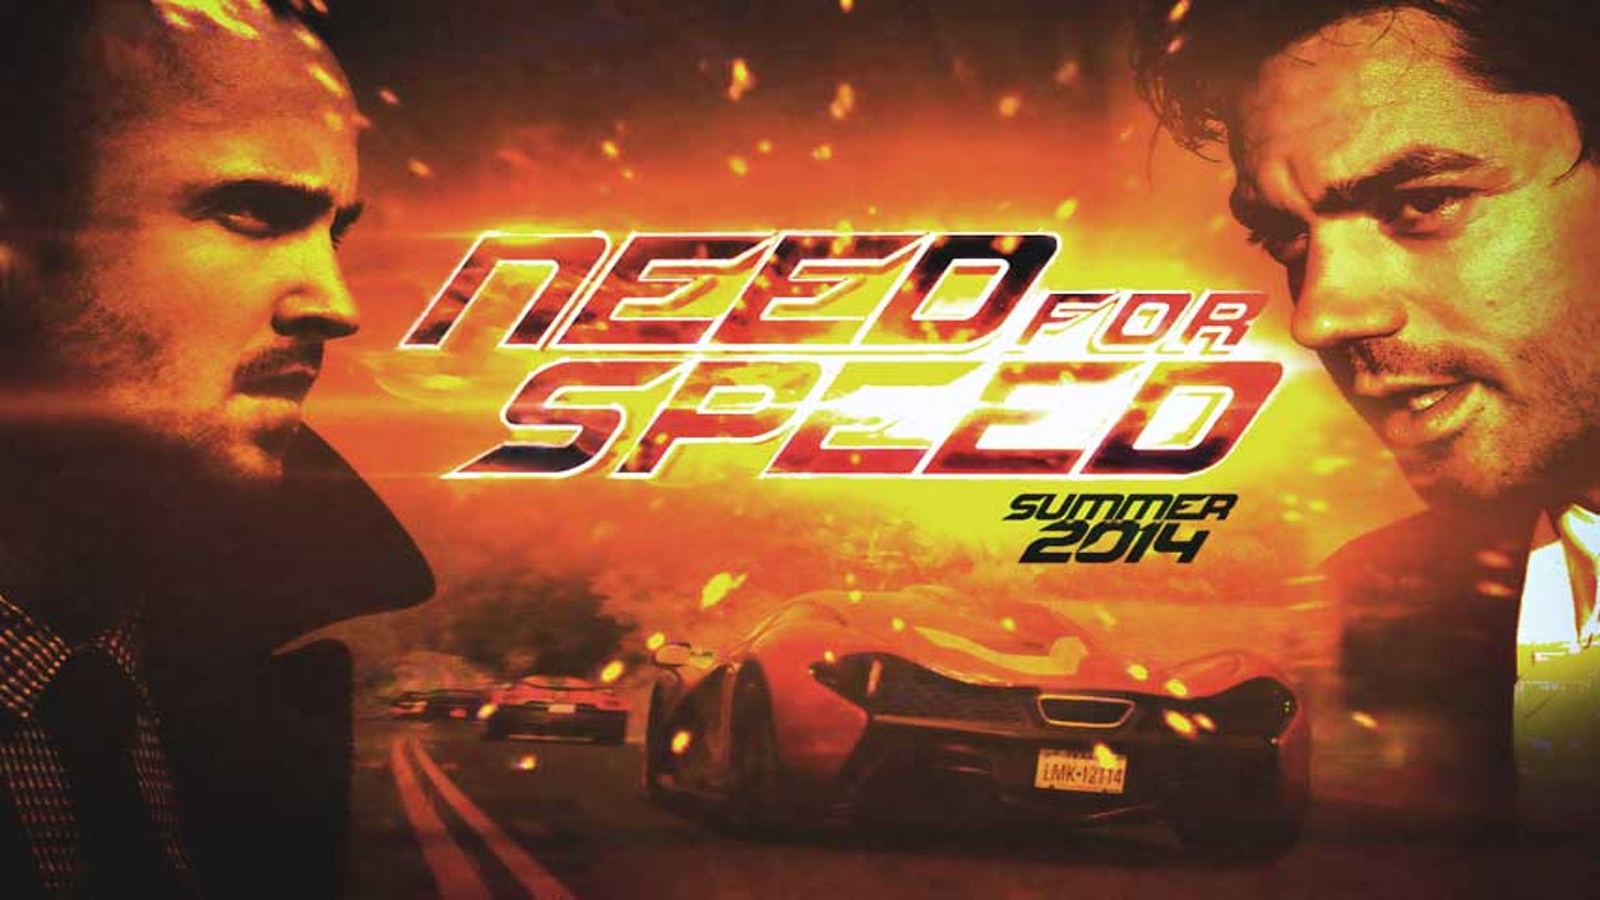 Need For Speed movie has less respect for reality than the video game it's  based on